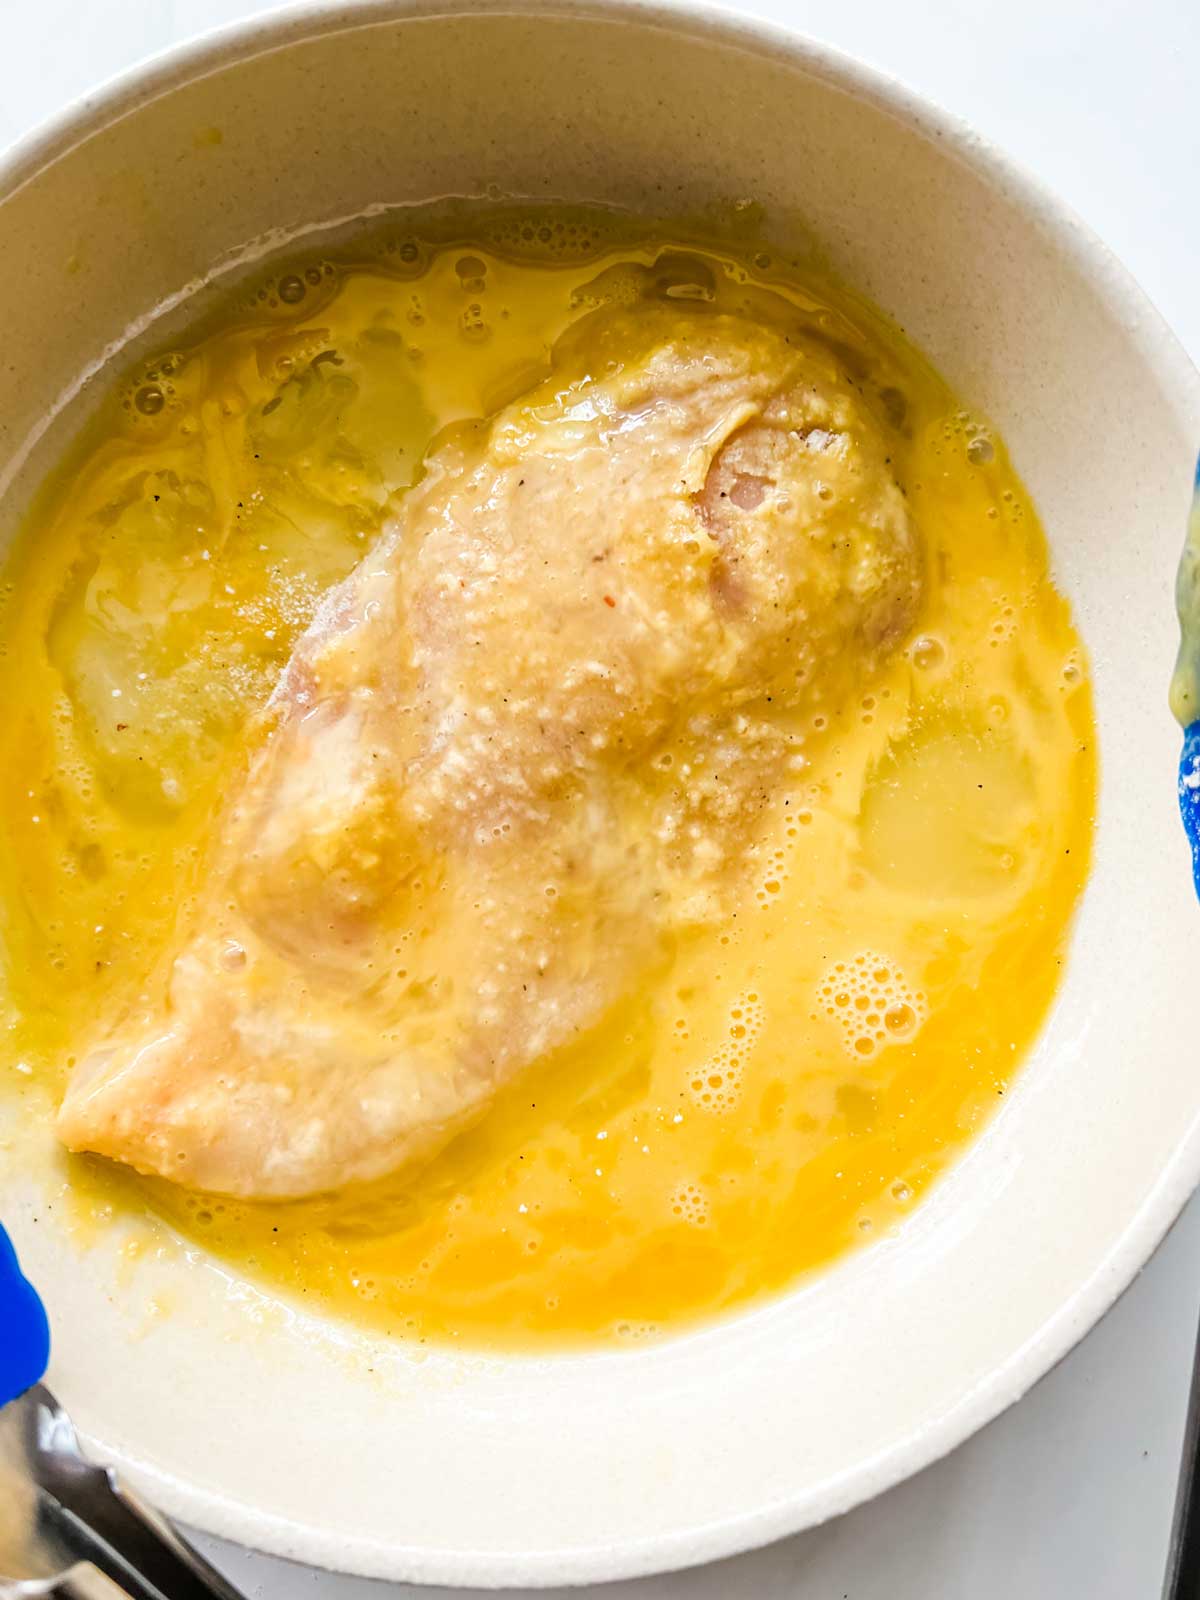 Chicken that has been dipped in coconut in a bowl of beaten egg.